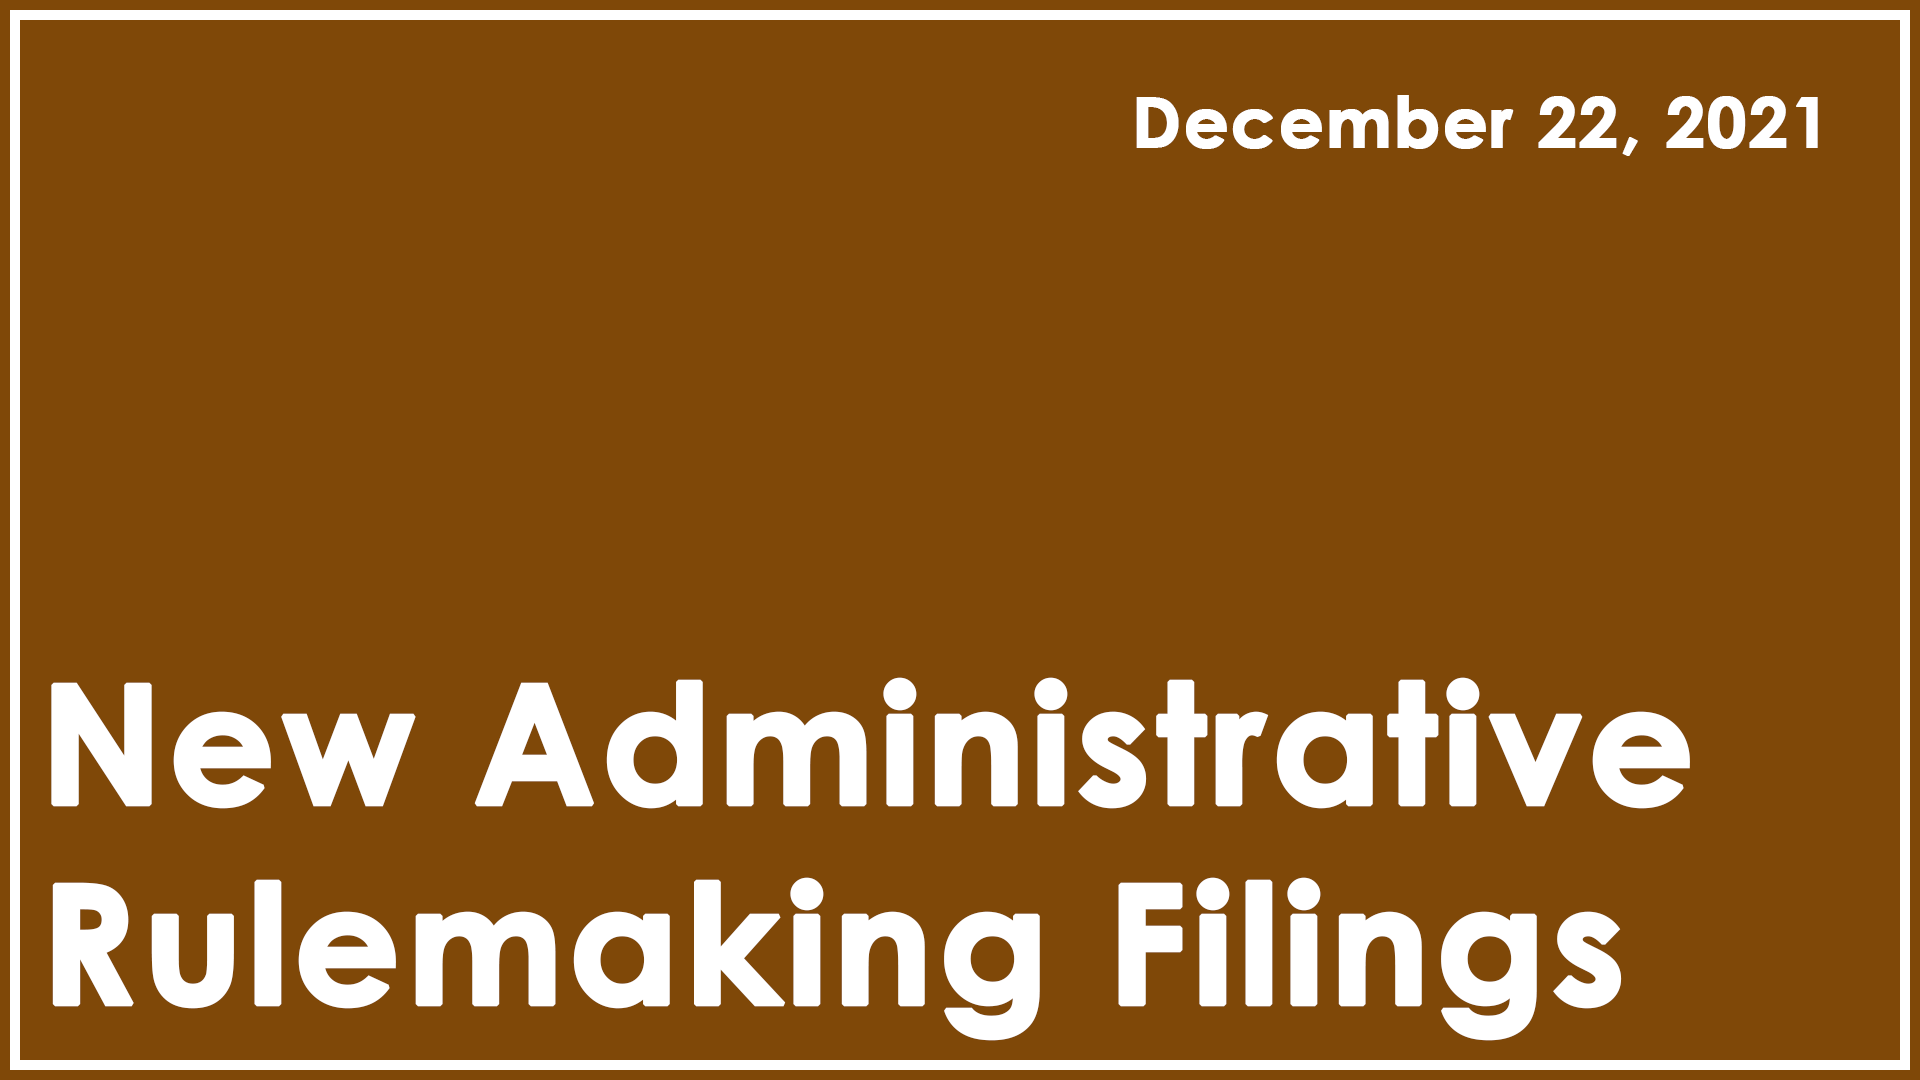 Notice of Department Rulemaking Filing - December 22, 2021